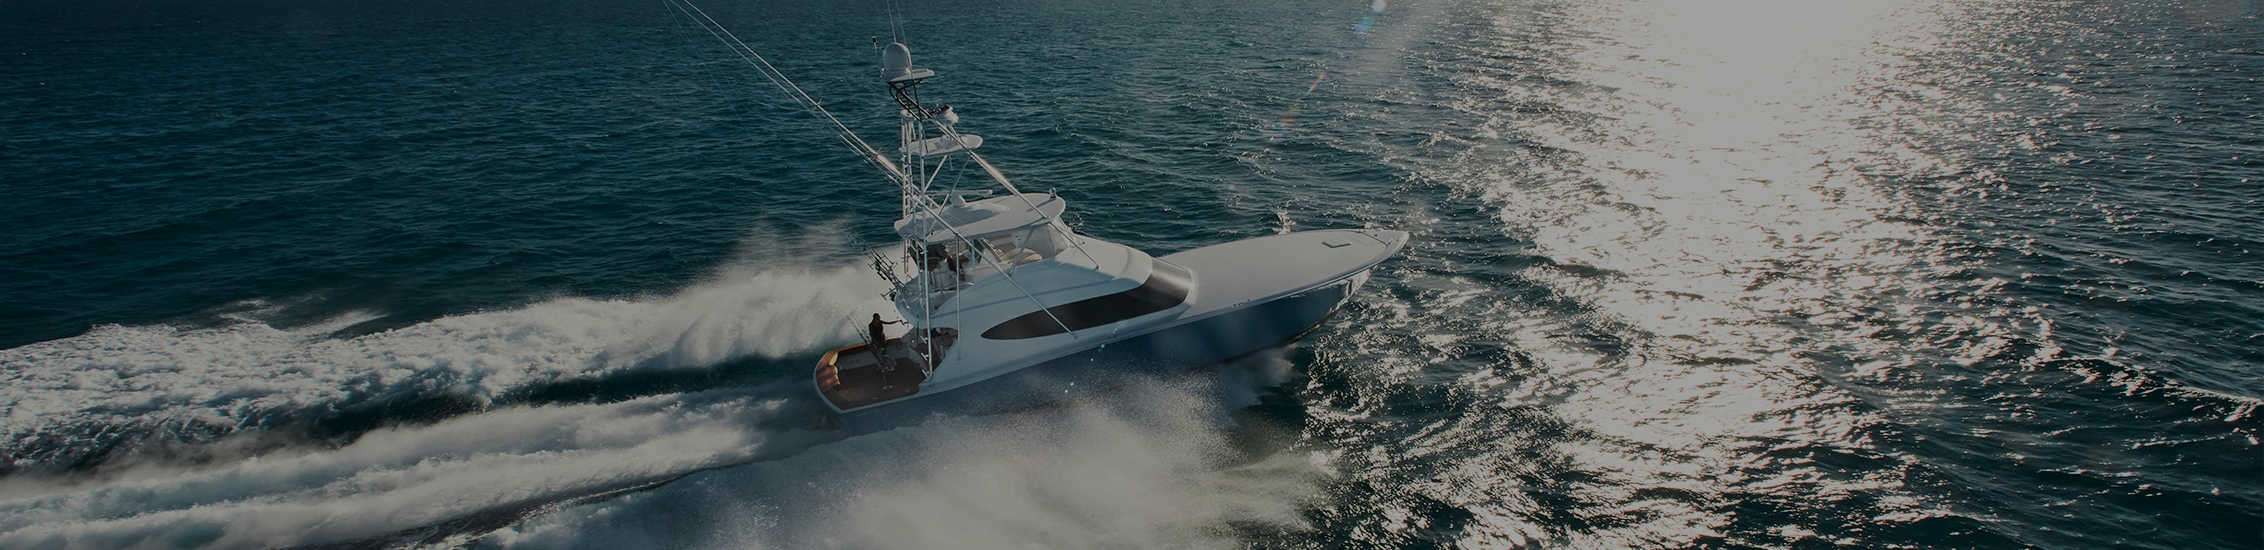 Used Hatteras Yachts for Sale, Hatteras Boats for Sale